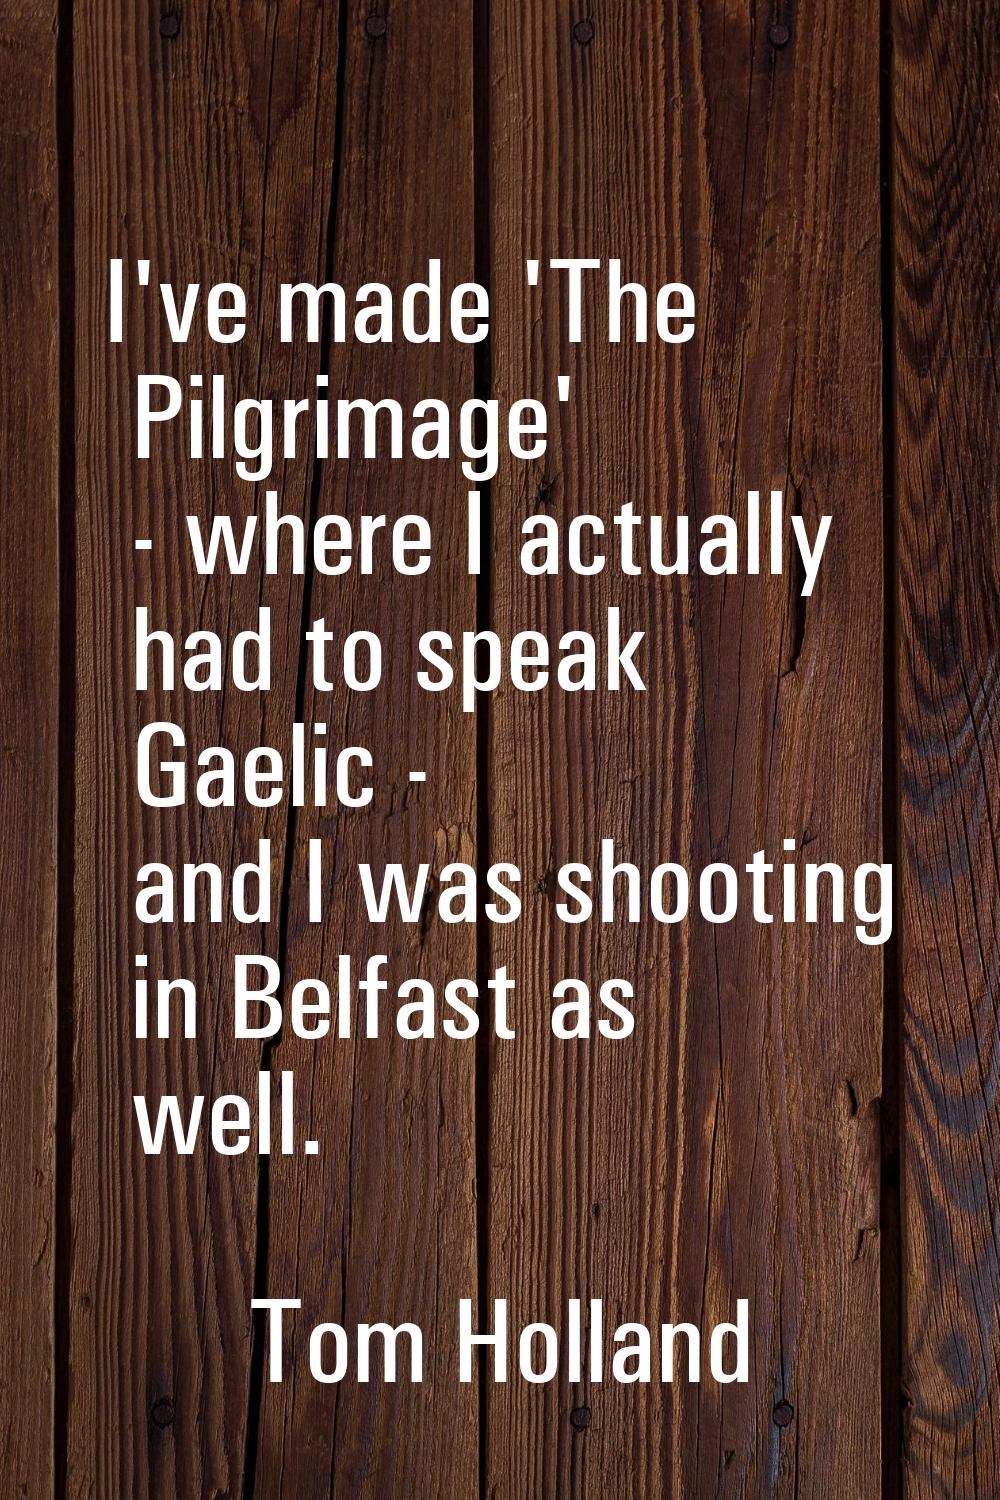 I've made 'The Pilgrimage' - where I actually had to speak Gaelic - and I was shooting in Belfast a